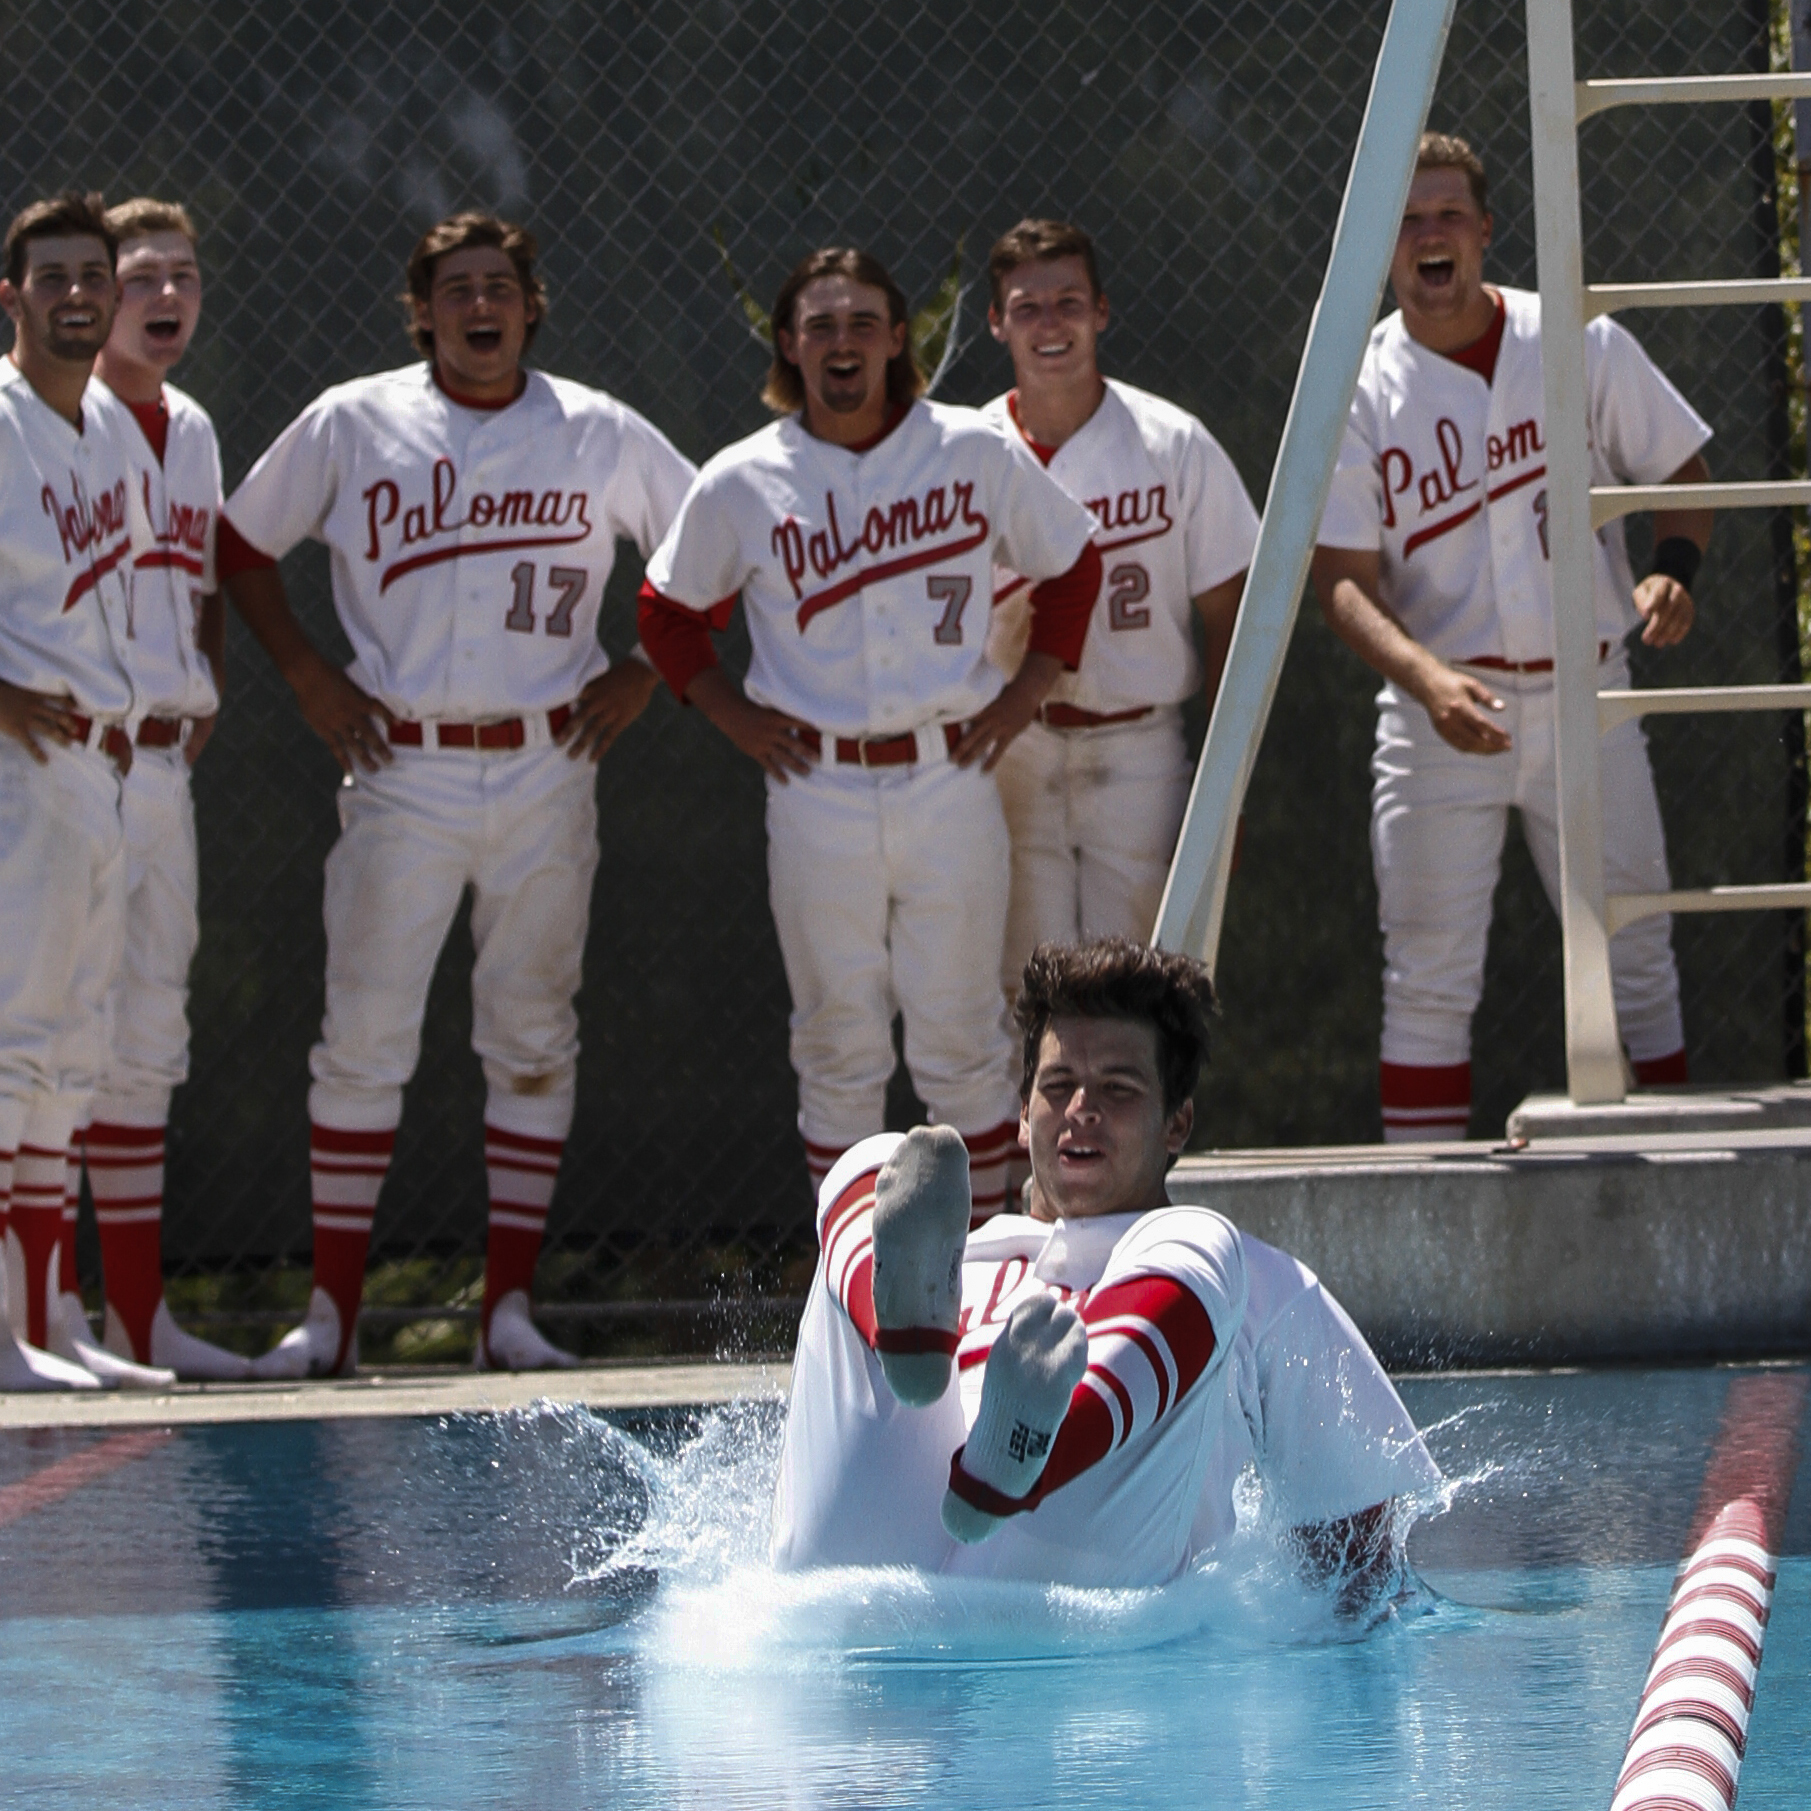 A male Palomar baseball player jumps into a pool butt-first with his feet in socks facing the viewer. Six team players stand in the background and laugh.